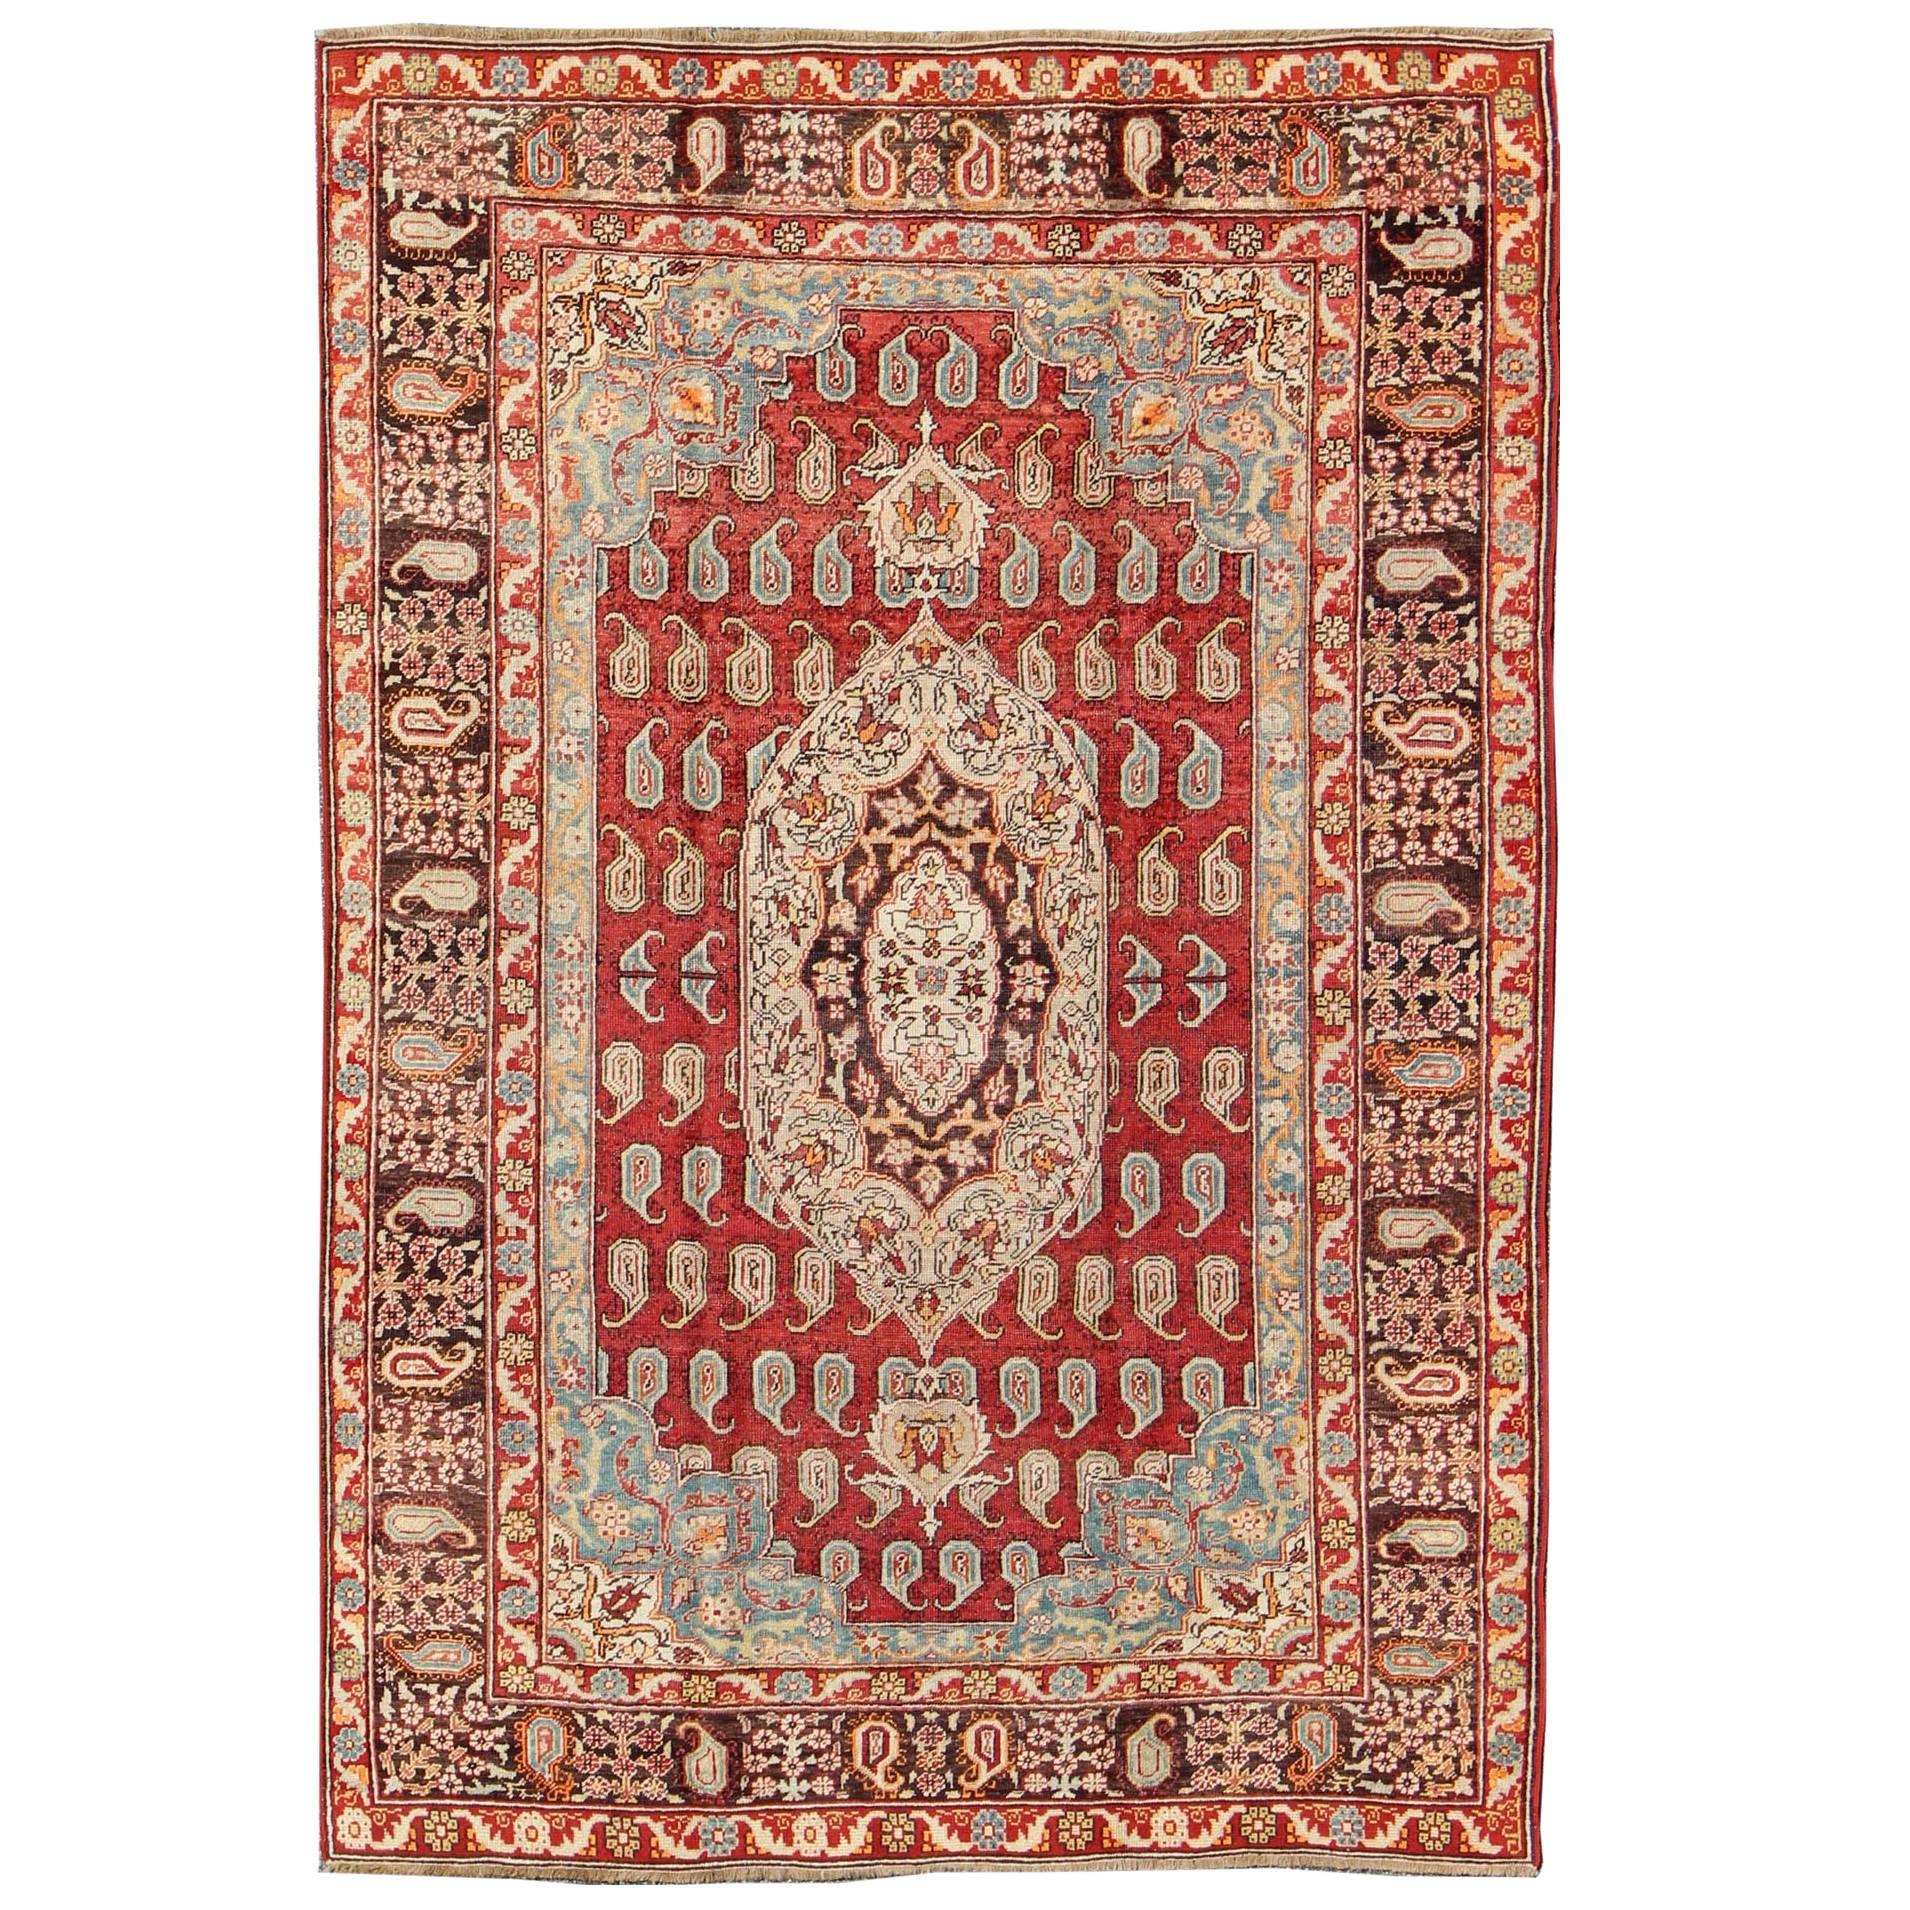 Antique Turkish Oushak Rug with Paisley Design in Red, Brown and Blue